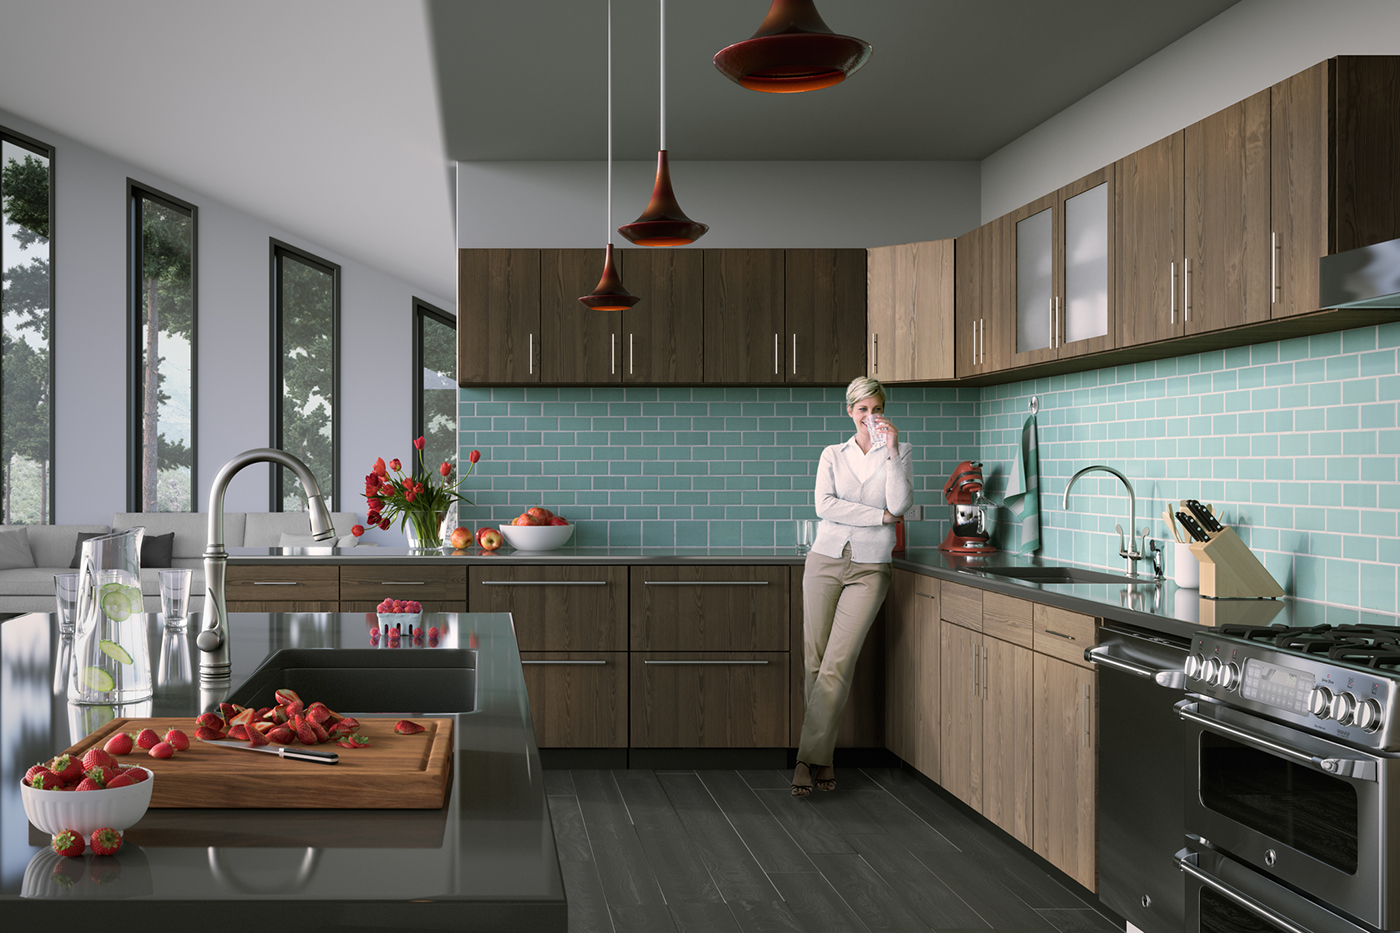 kitchen 3D Rendering CGI Kitchen Appliance appliance Architectural rendering Tomato Faucet